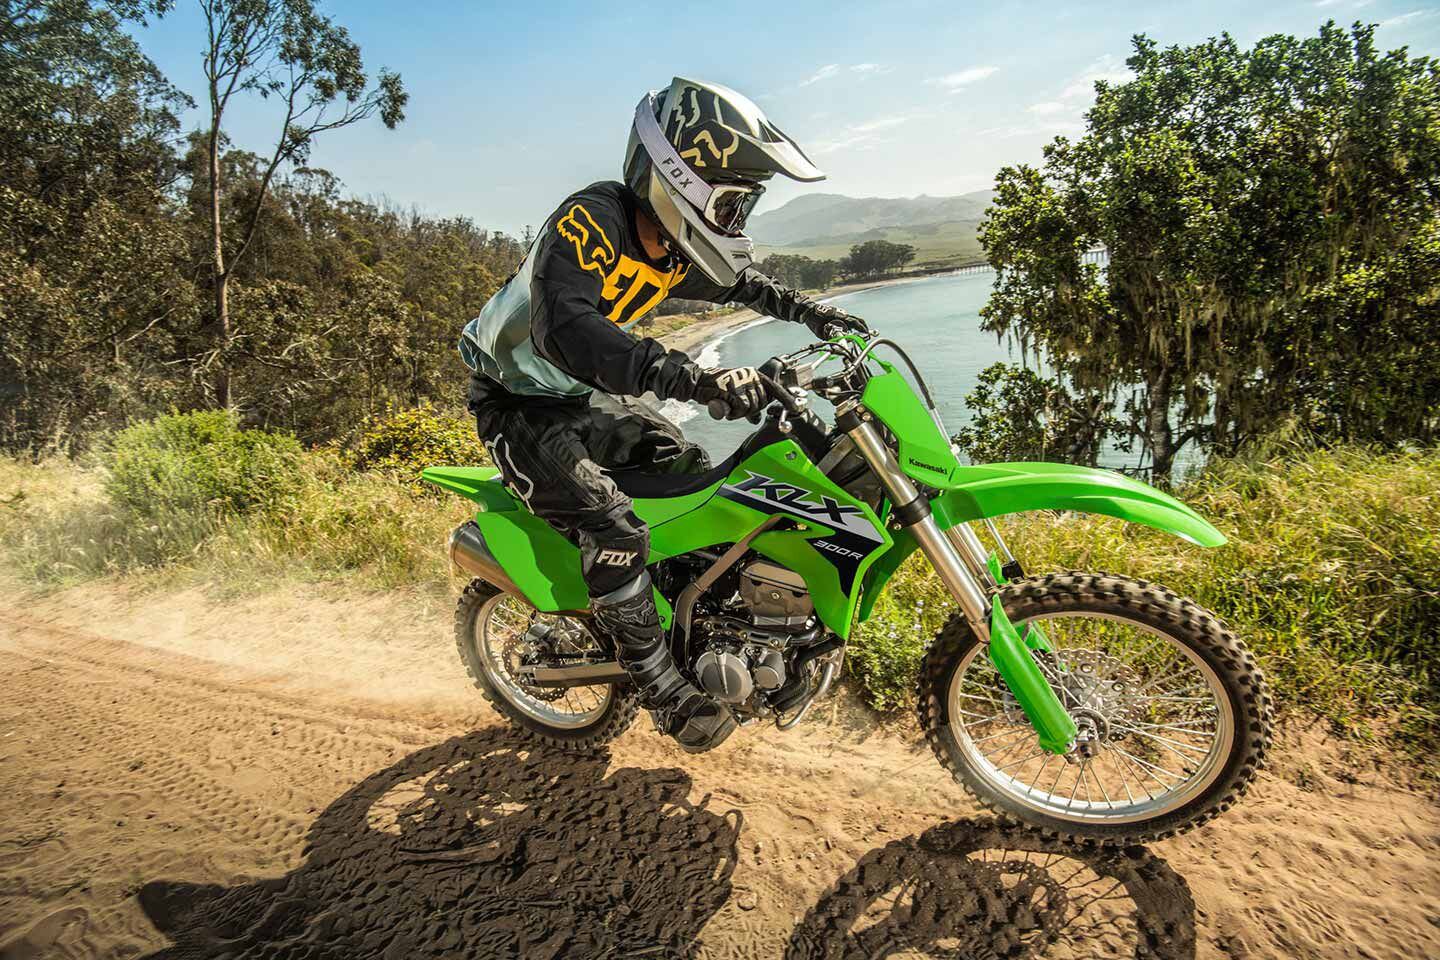 Are the trails calling? Kawasaki’s KLX300R is ready to answer.